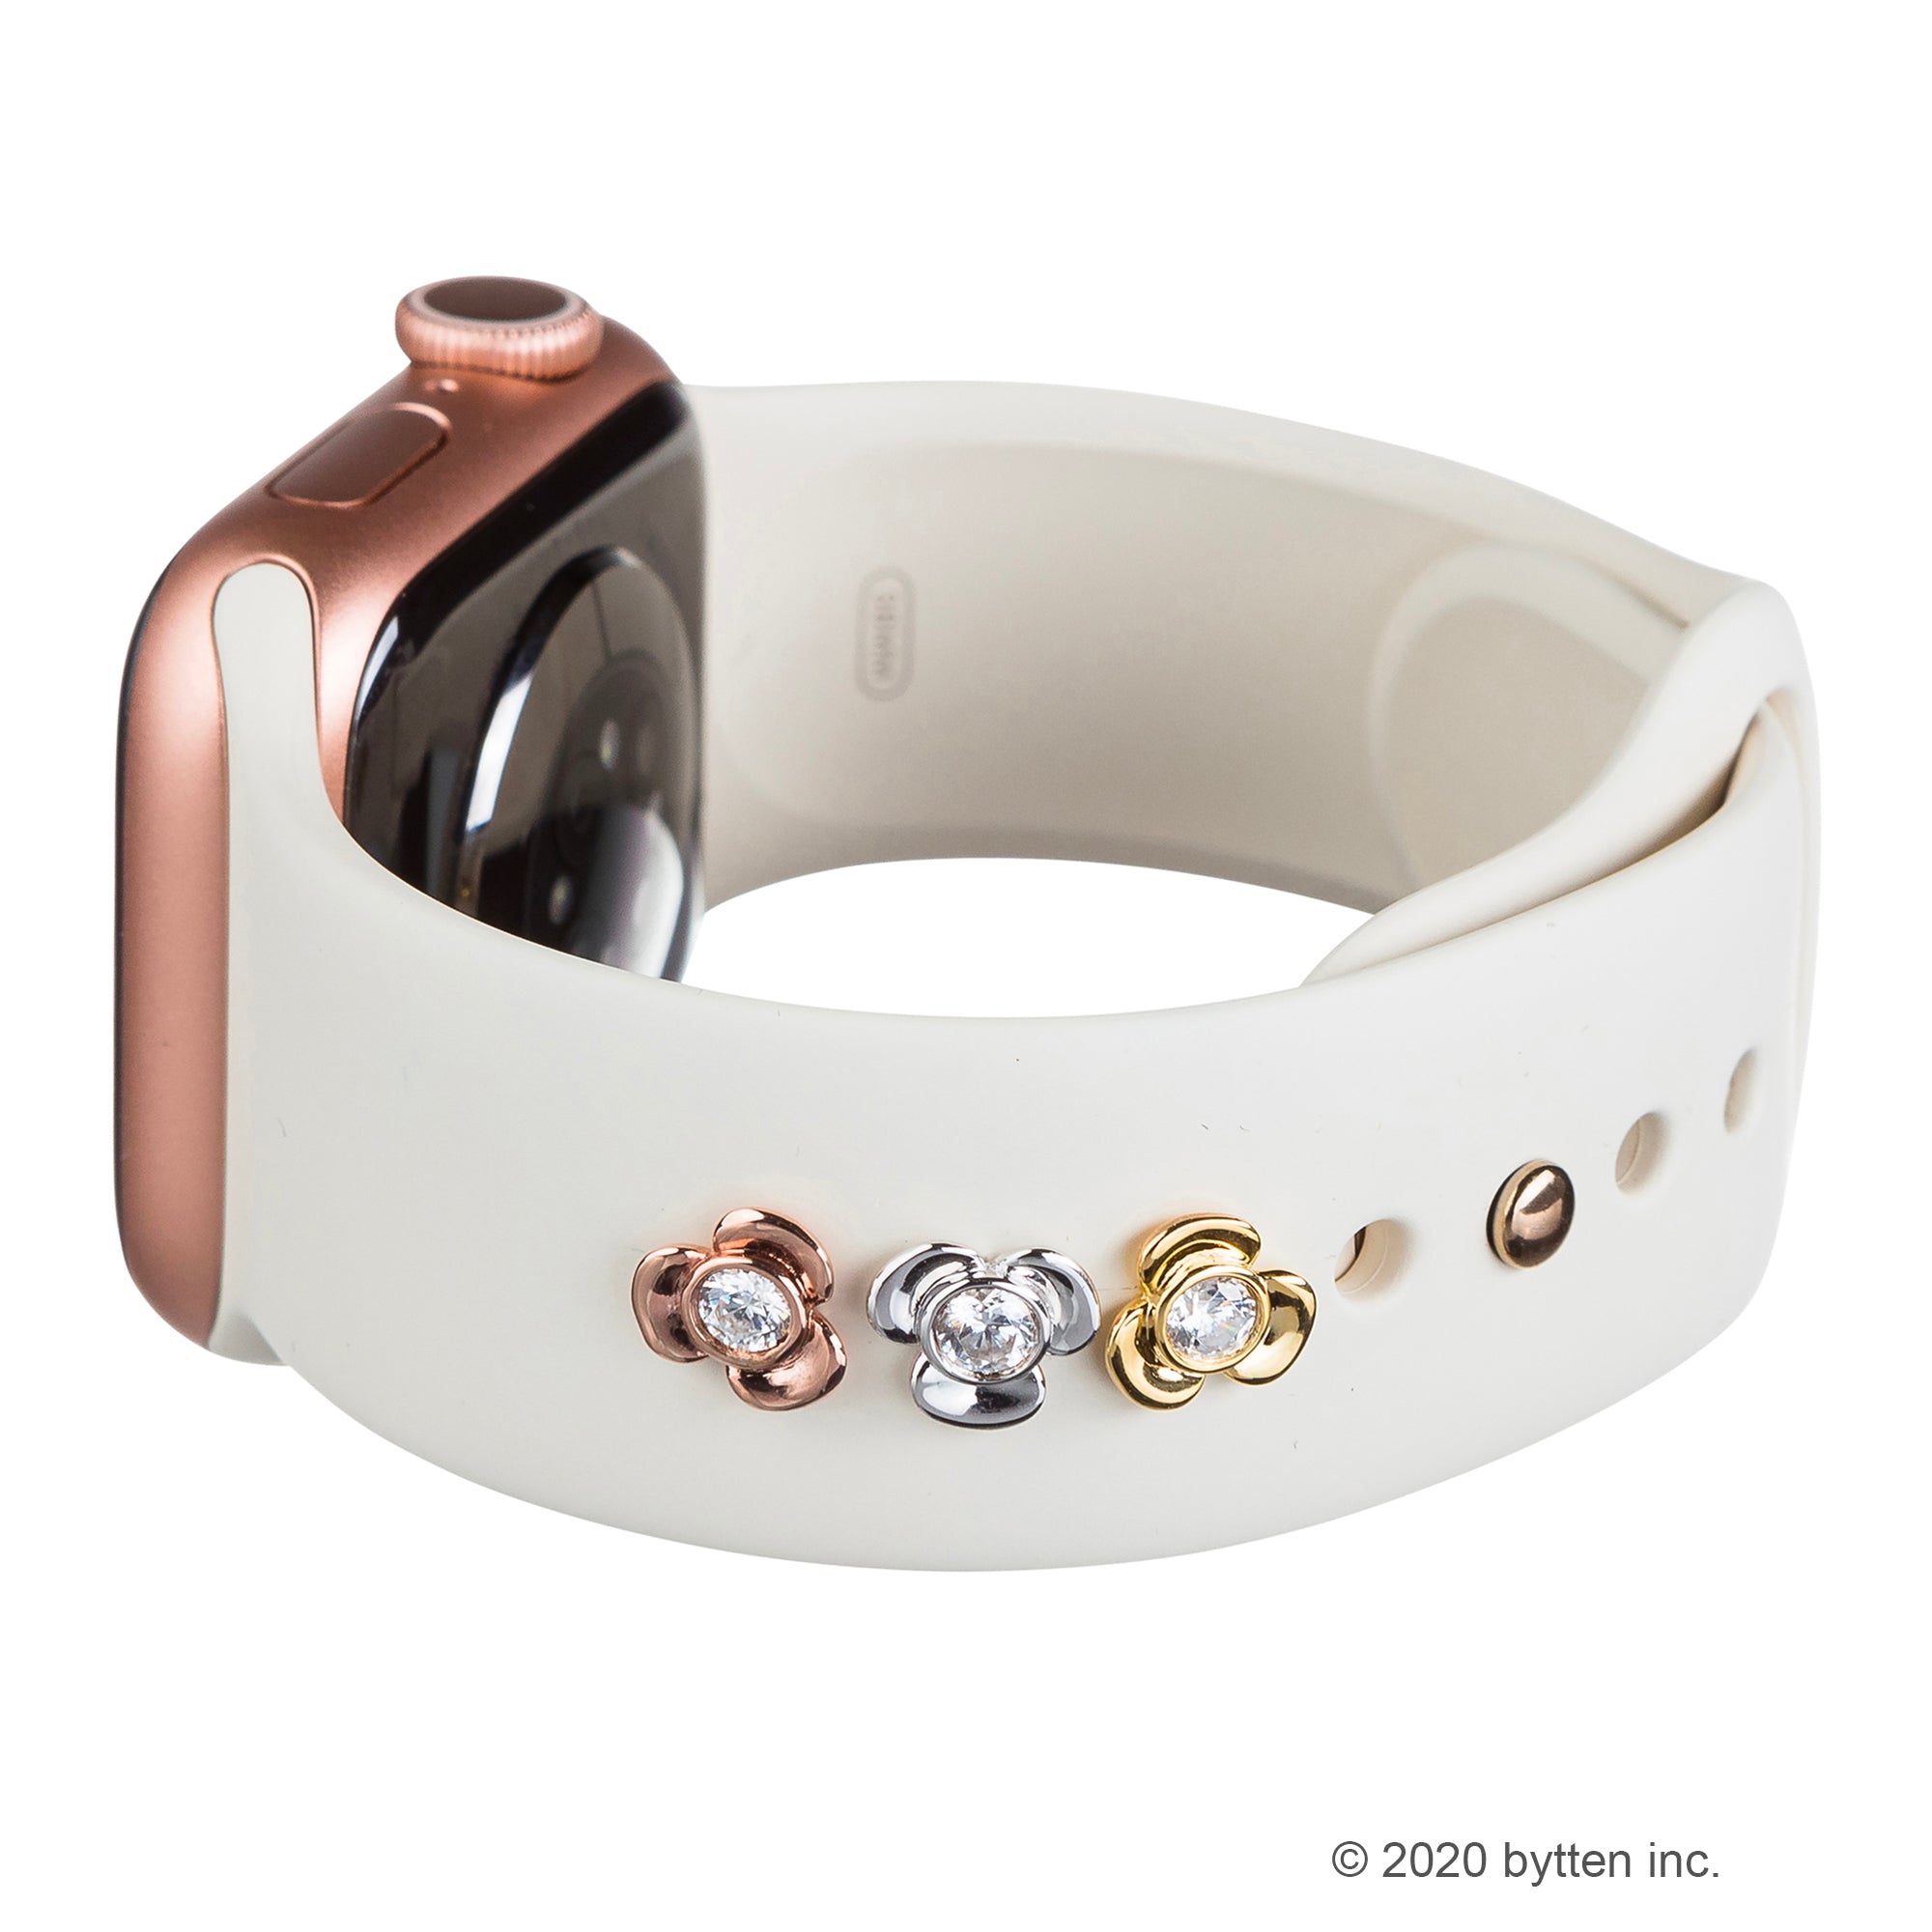 bytten apple watch pansy cz iwatch charms in rose gold, silver and gold